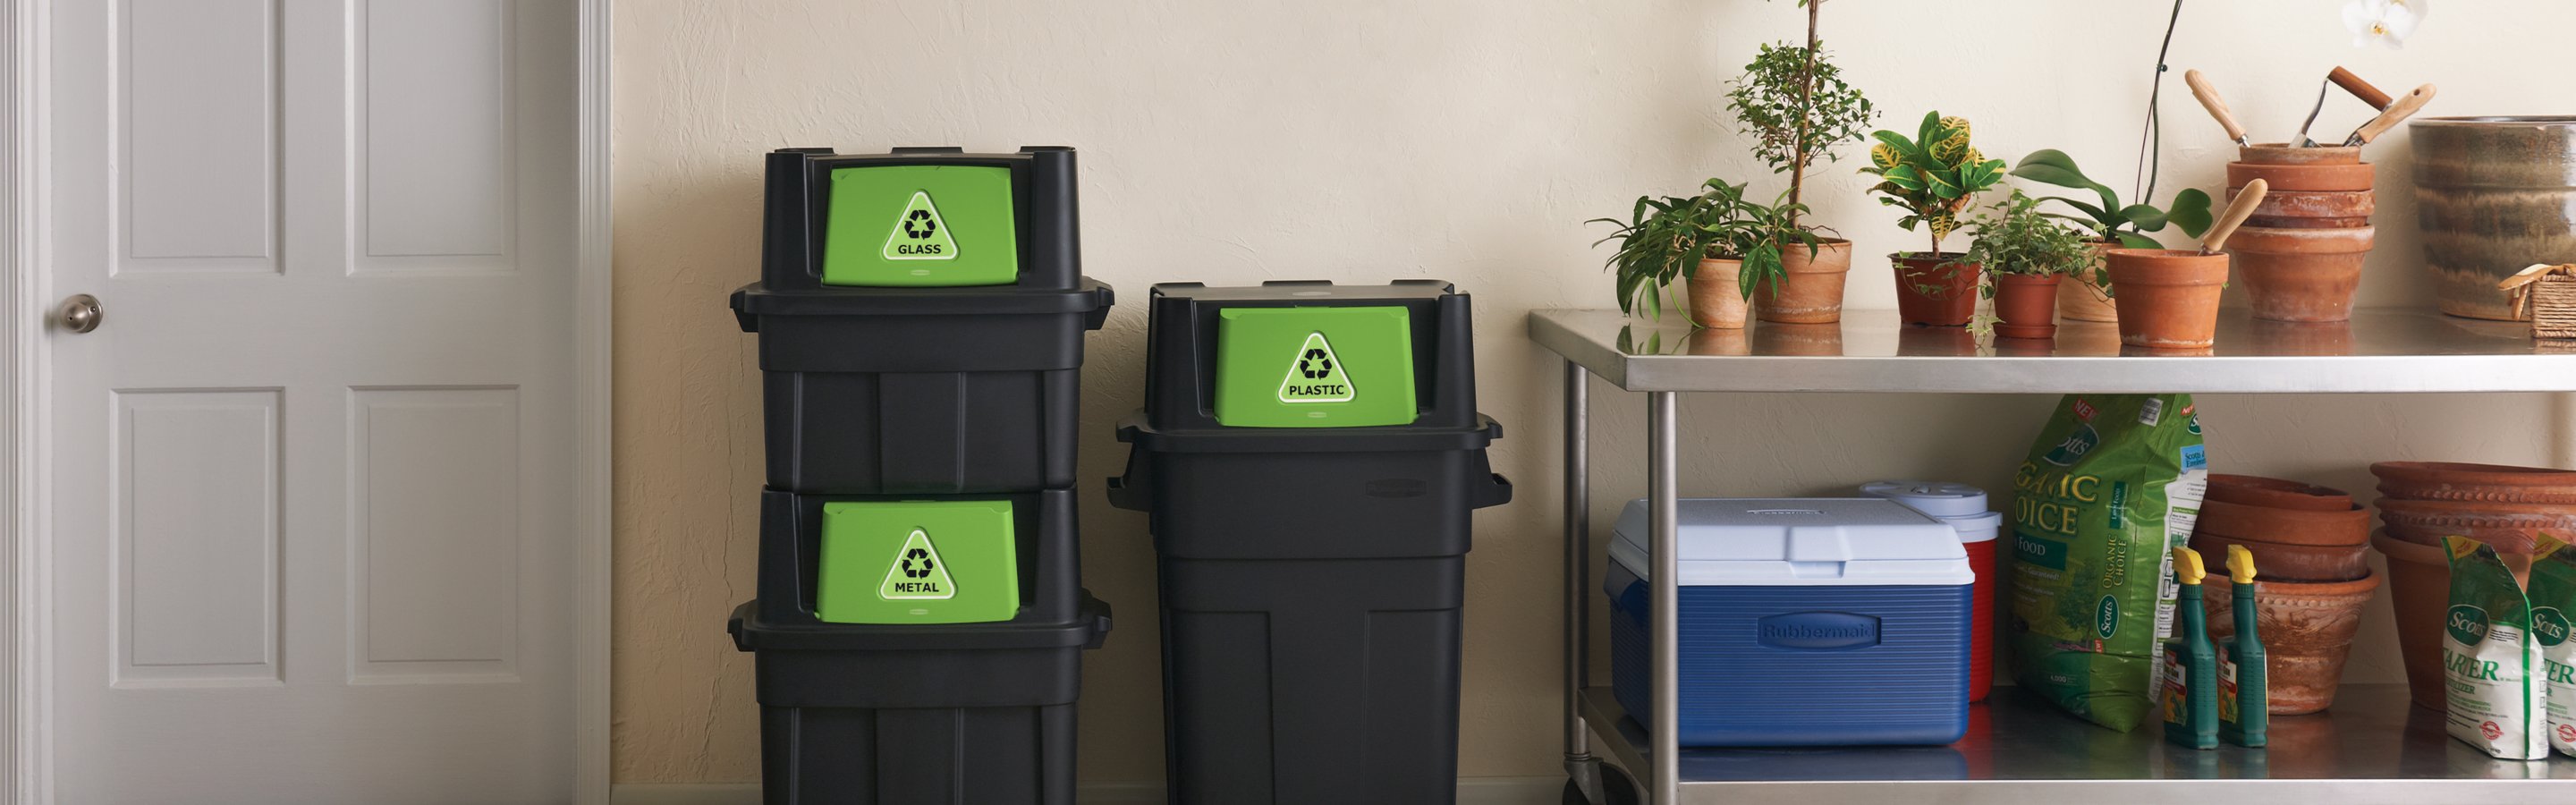 recycling containers inside home